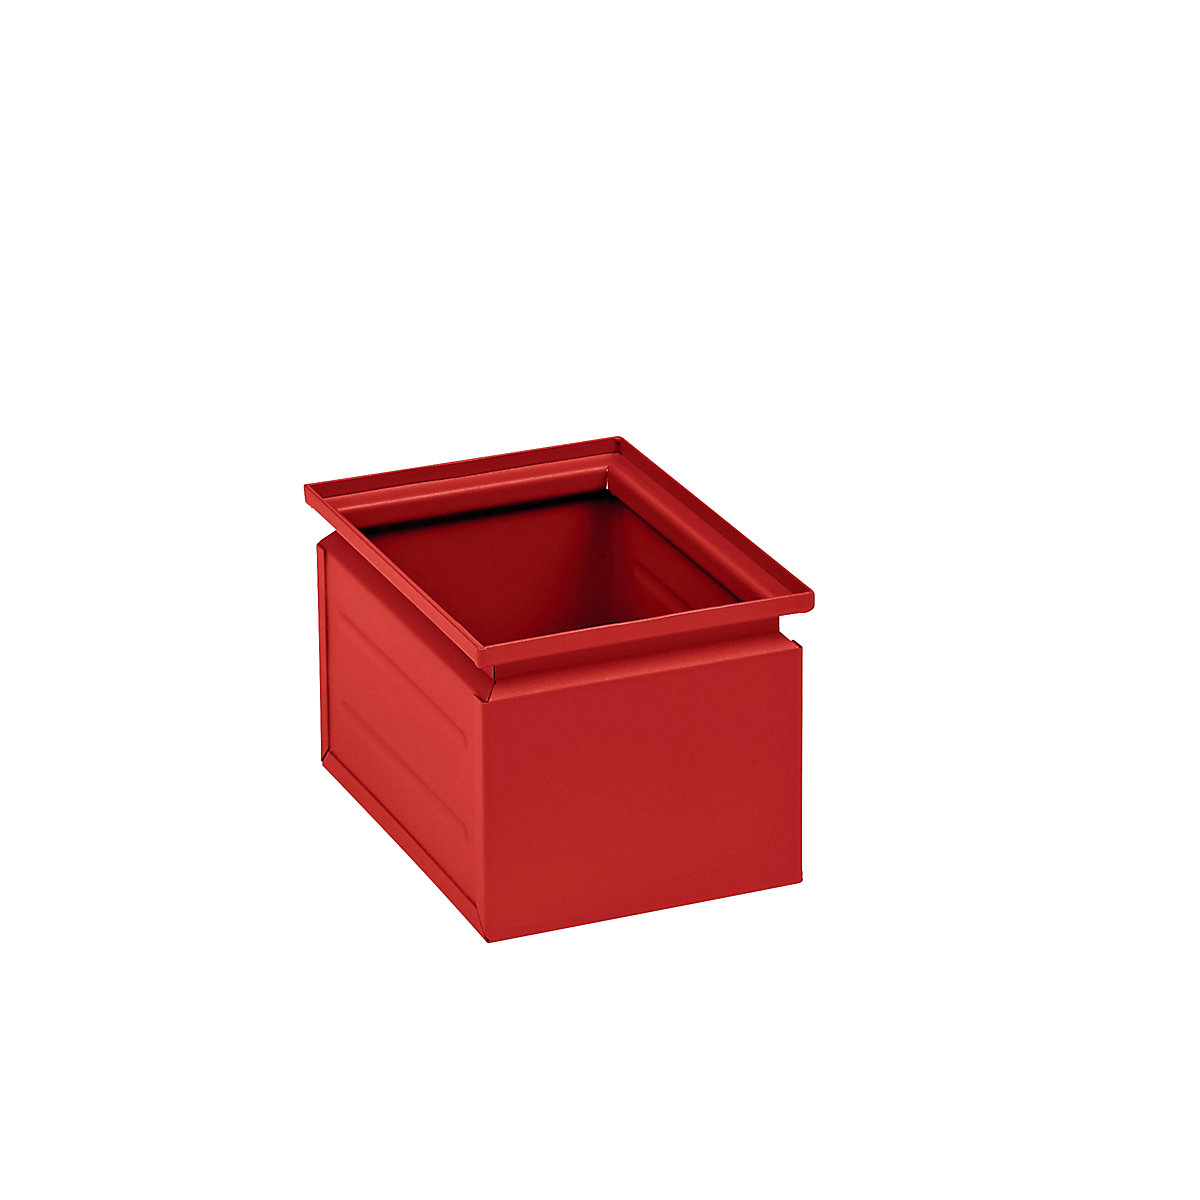 Stacking container made of sheet steel, capacity approx. 3.6 l, flame red RAL 3000